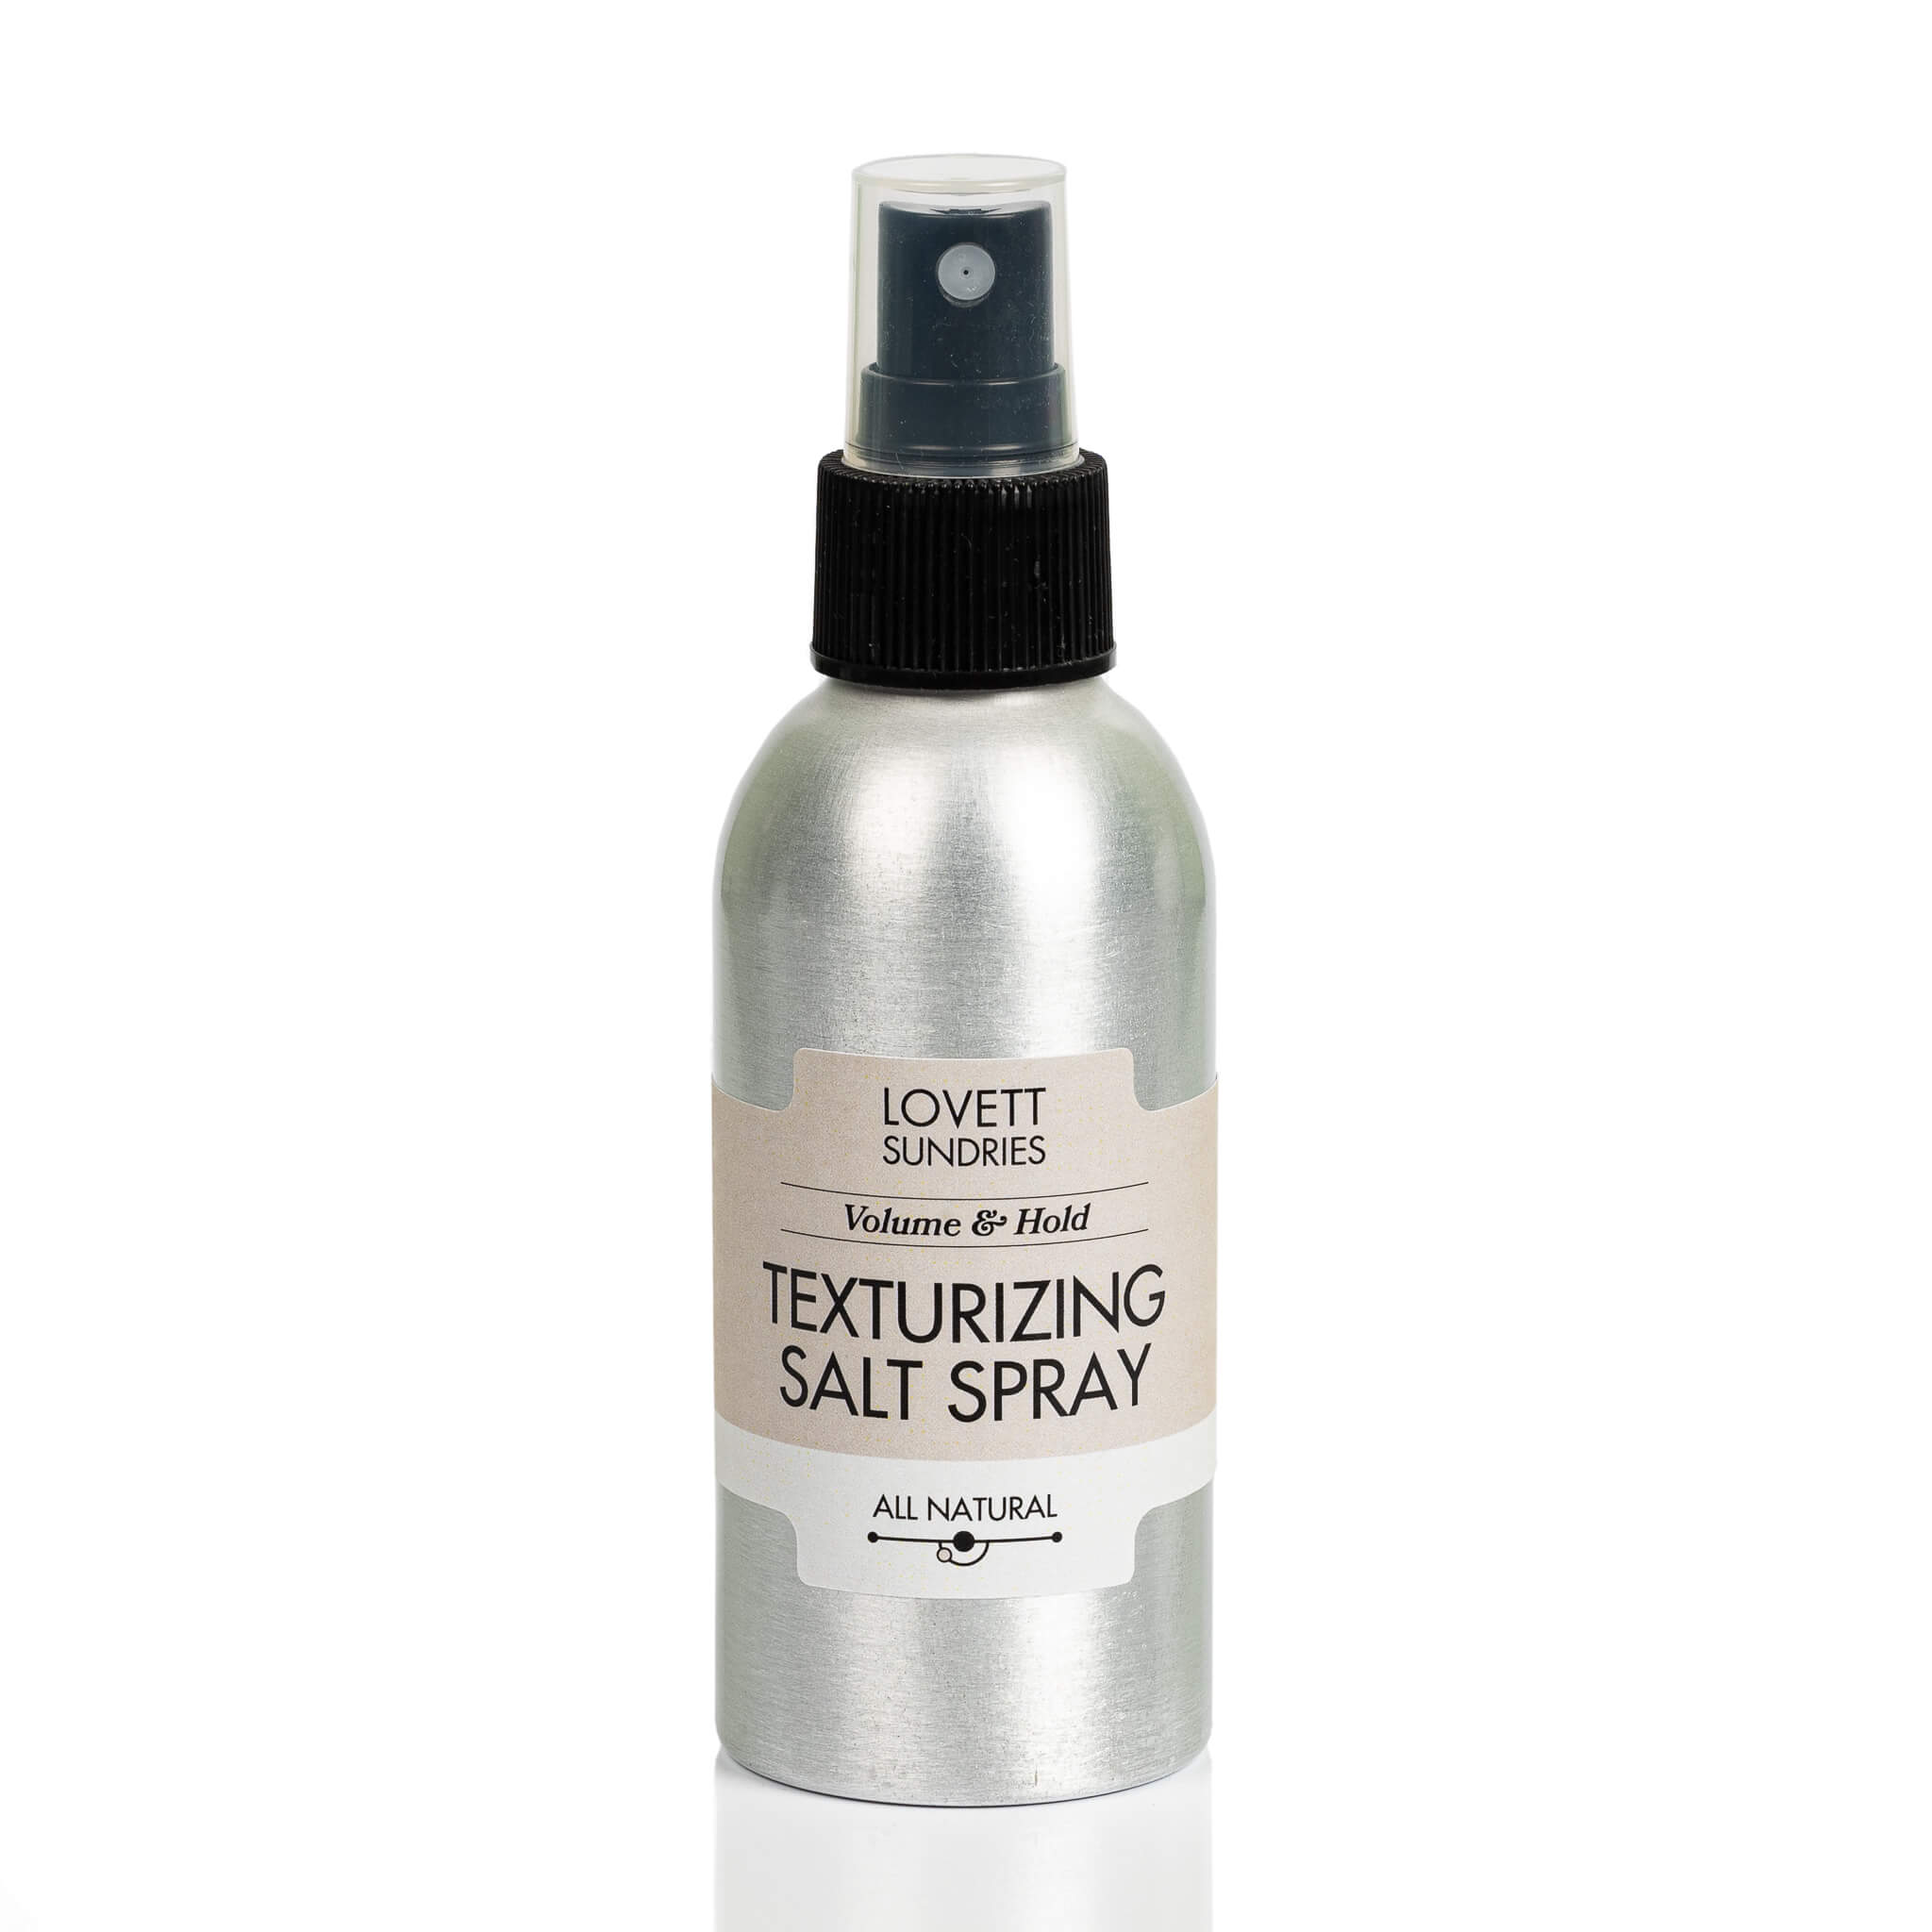 All natural unscented texturizing salt hair spray for voume and hold in a recyclable aluminum bottle with a spray top. 